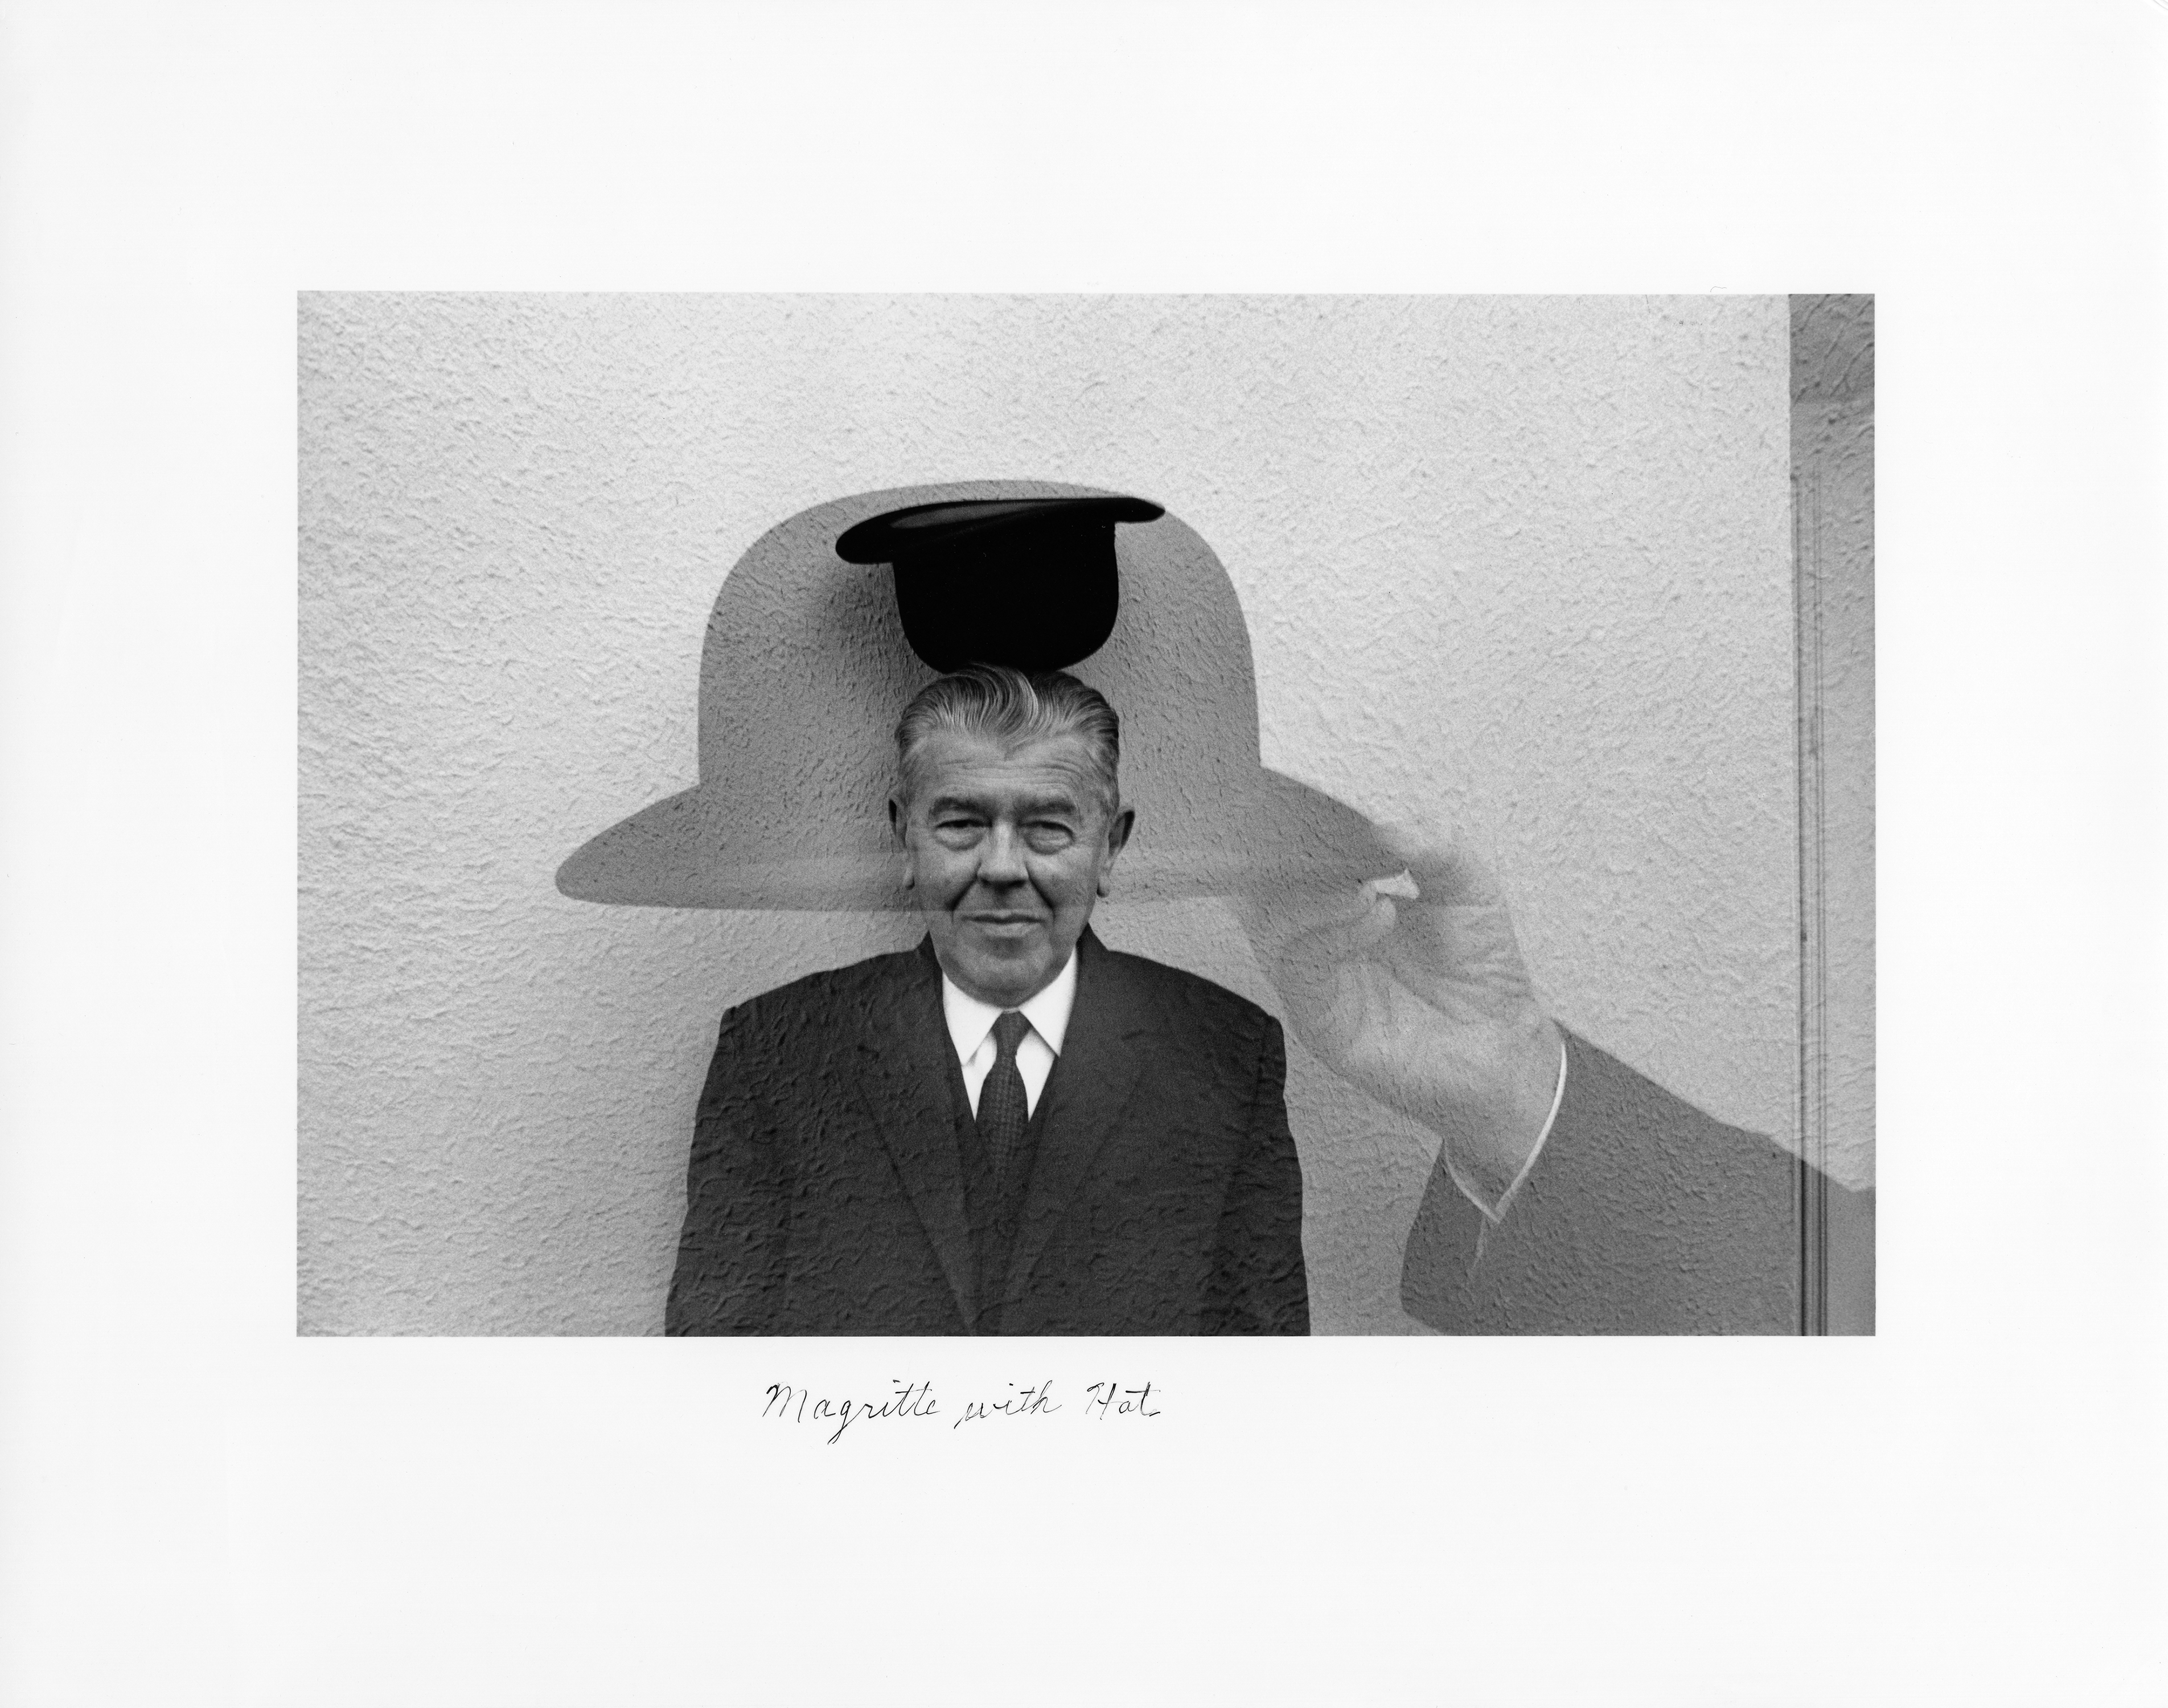 magritte-with-hat.jpg